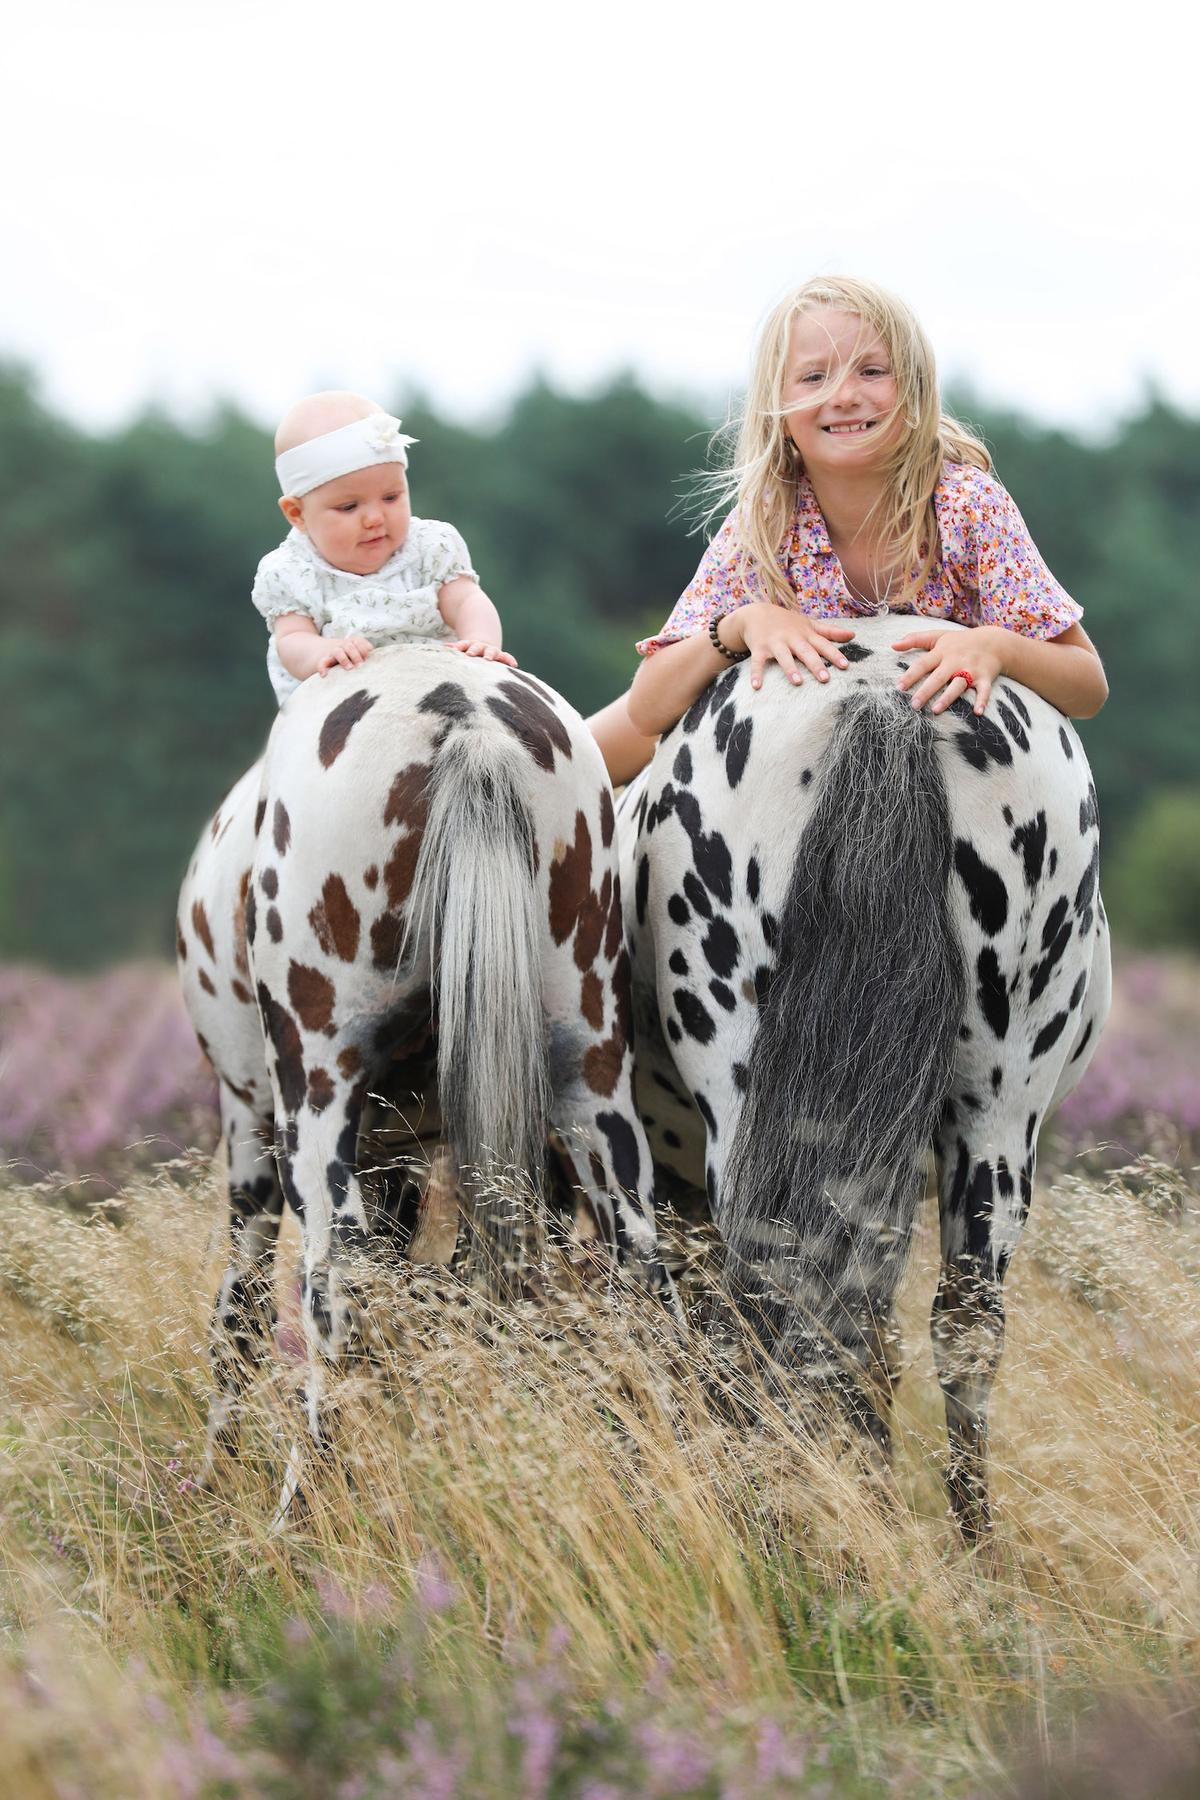 Greetje's children, Sunnery (L) and Jolie, on the back of the ponies. (Courtesy of Caters News)